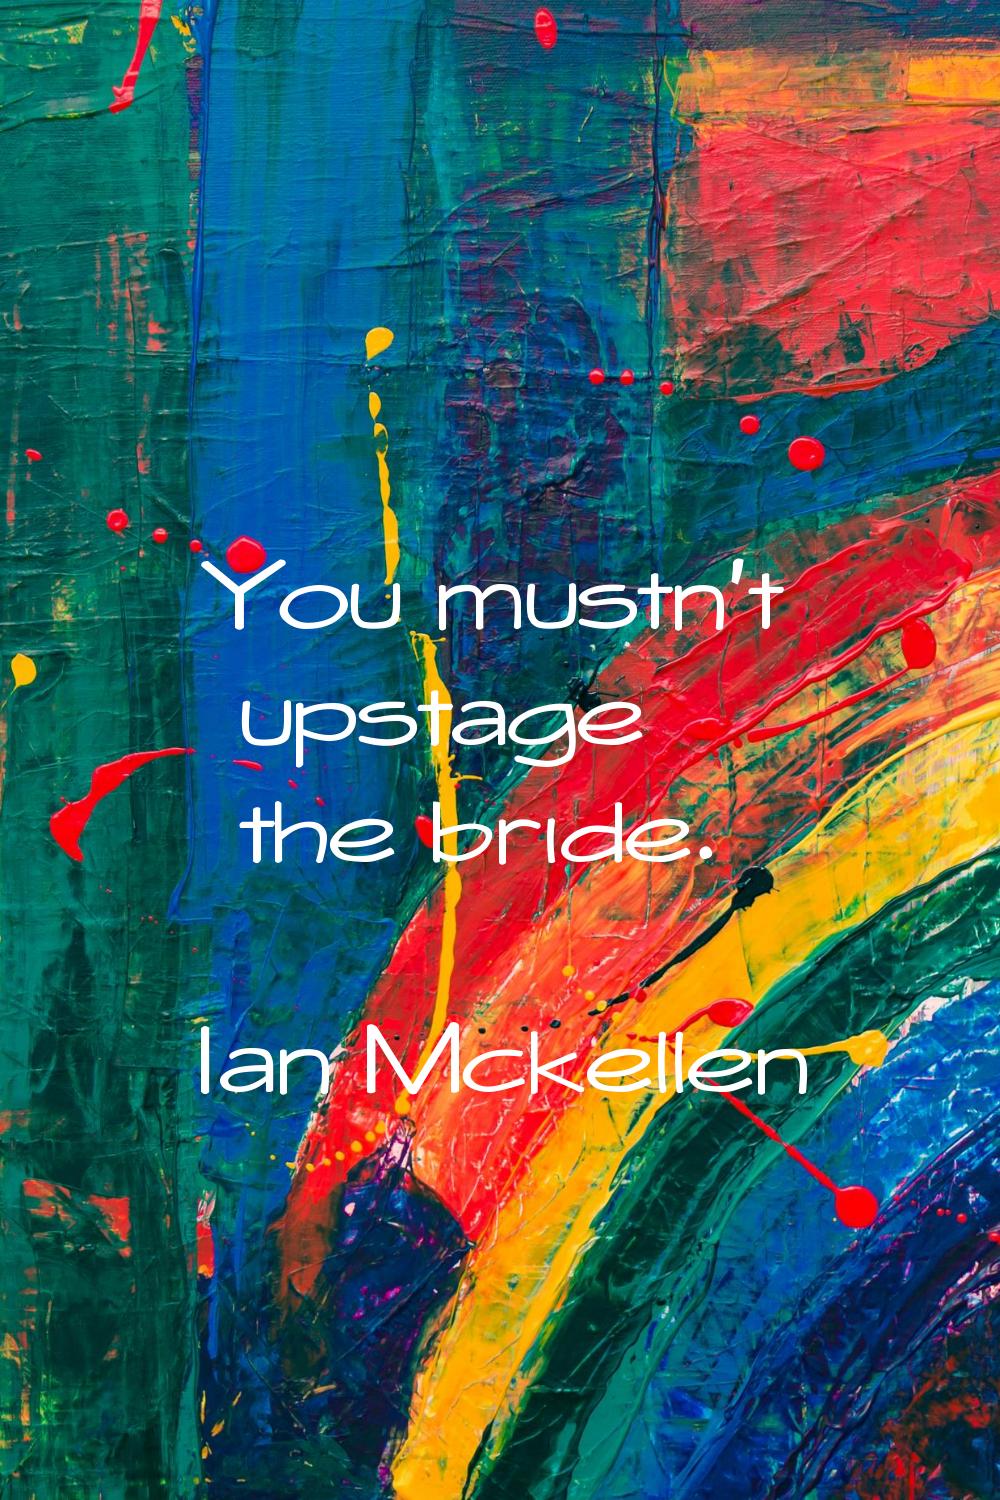 You mustn't upstage the bride.